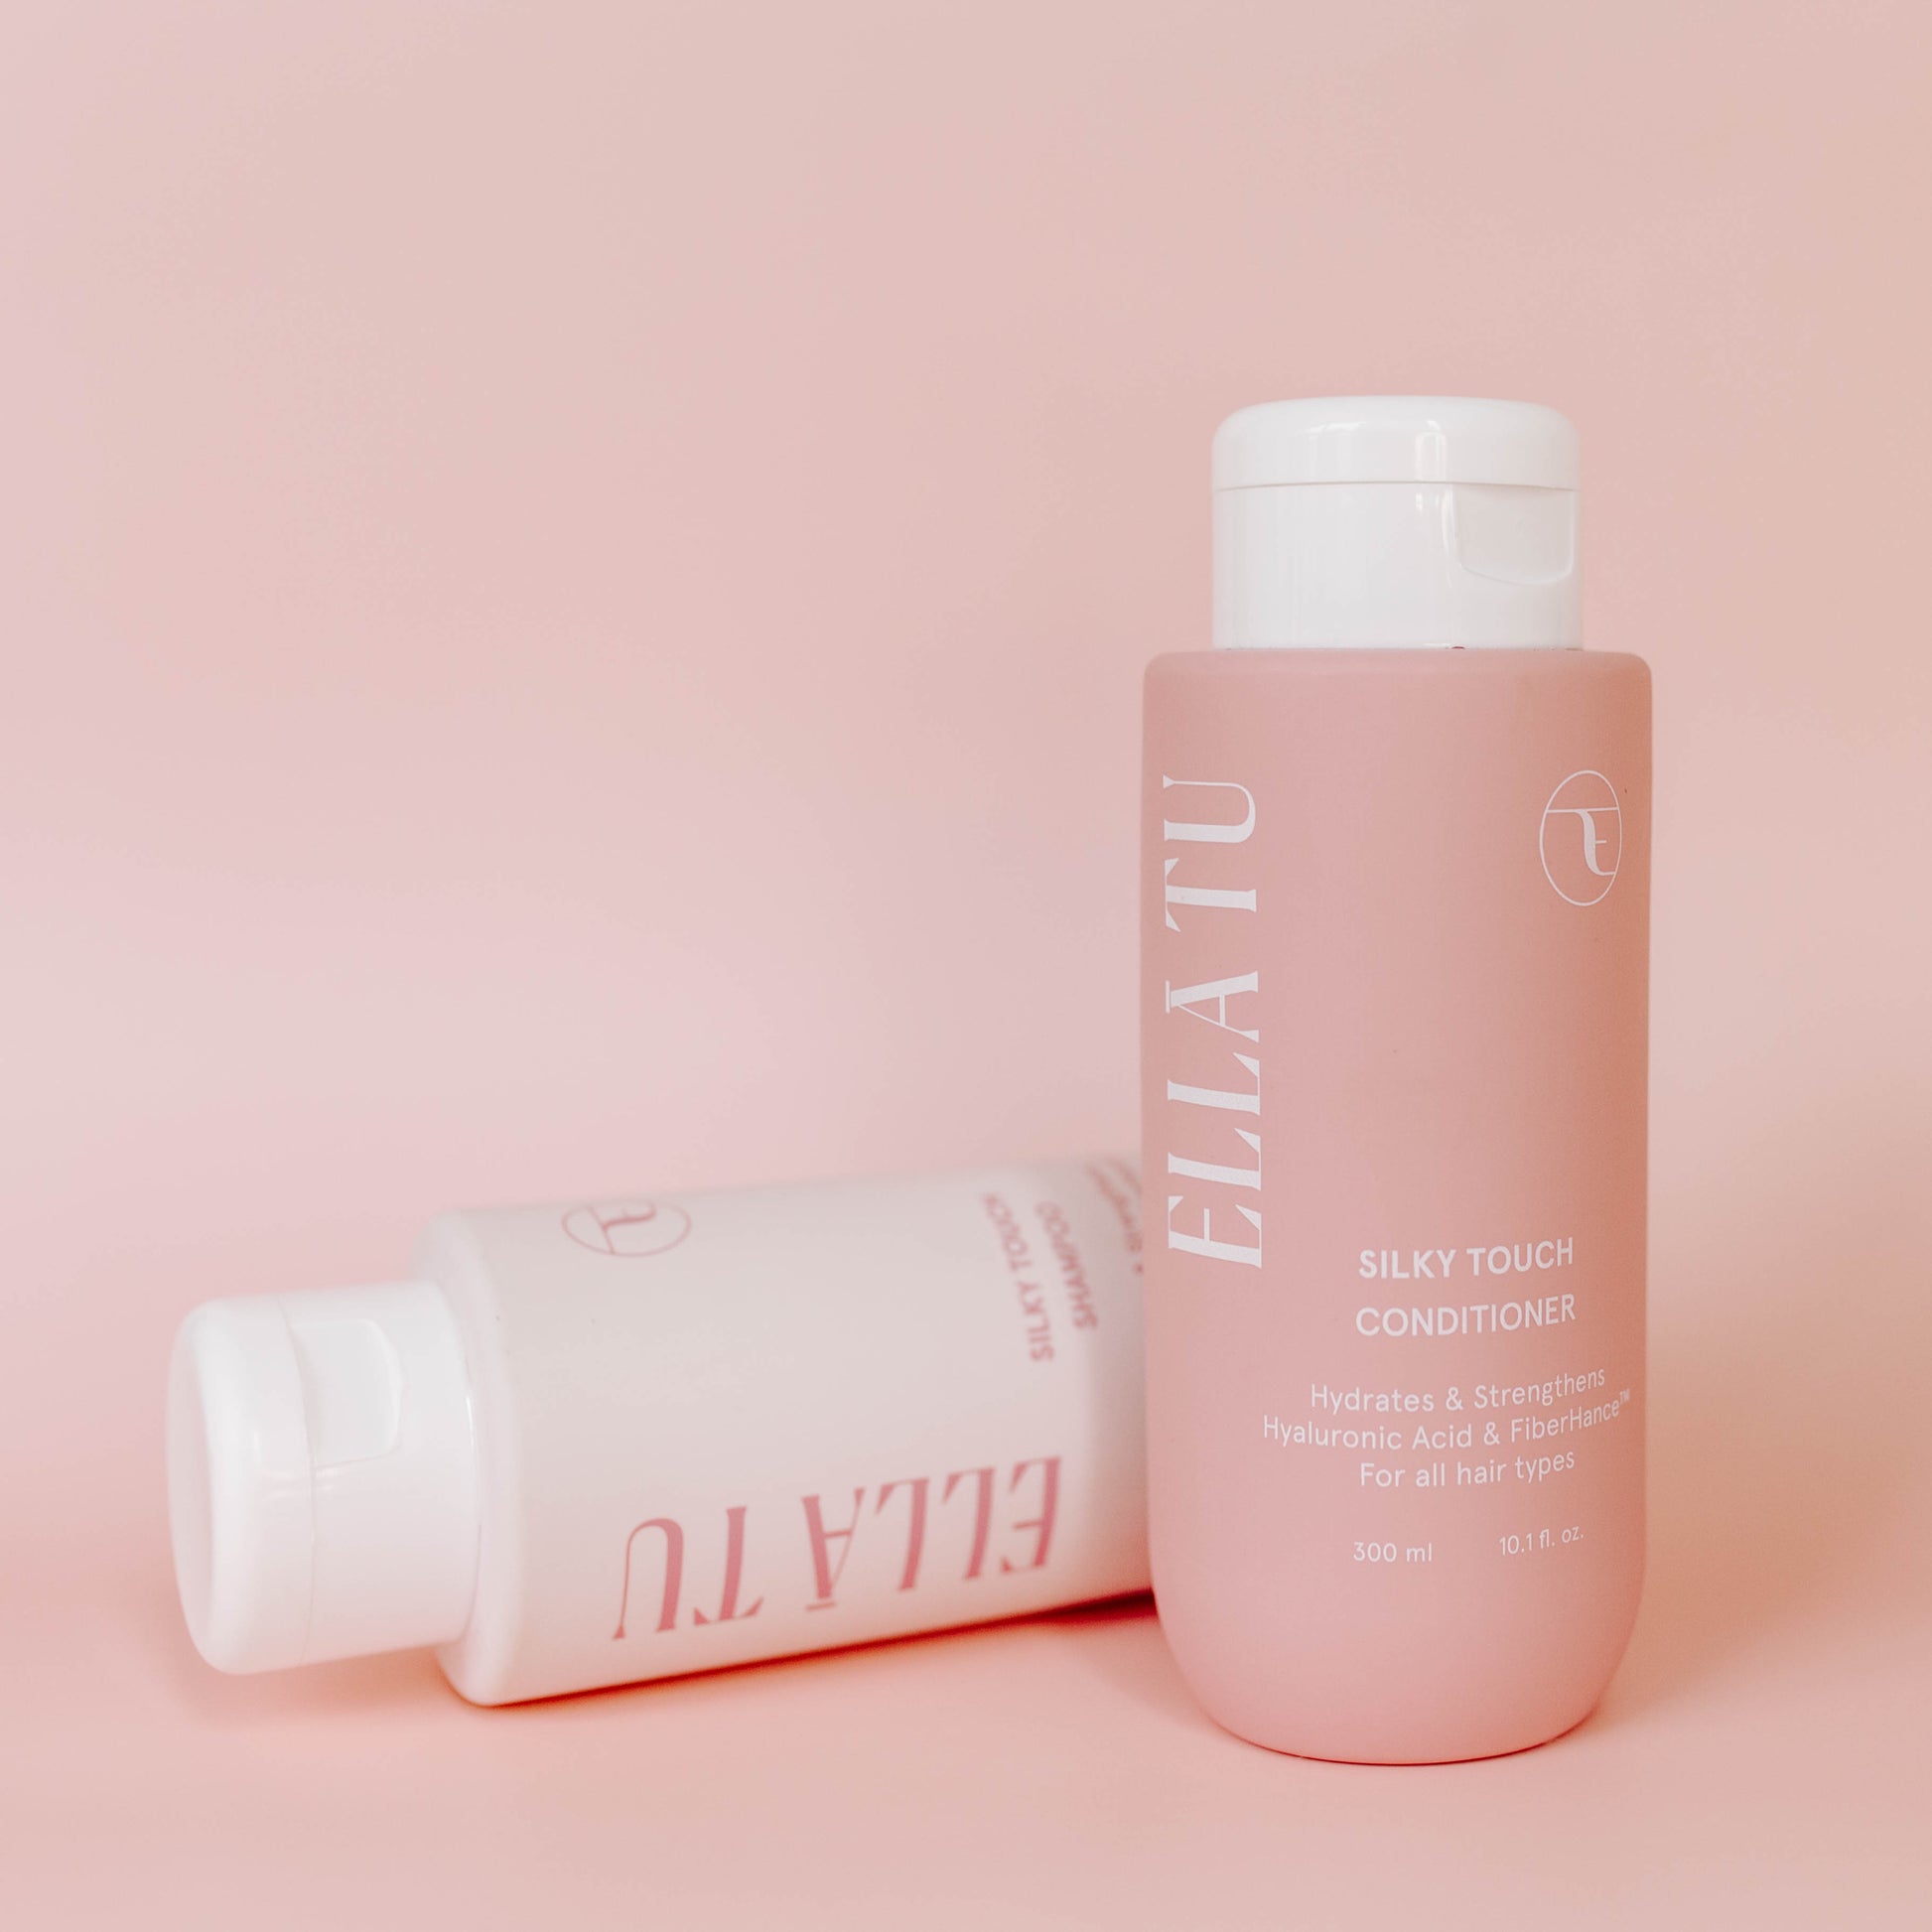 The Ellatu Silky Touch Shampoo and Condioner, formulated for dry, damaged, frizzy hair. Experience the power of Fiberhance, Hyaluronic Acid, Castor and Moringa oil for healthier, stronger, softer hair.